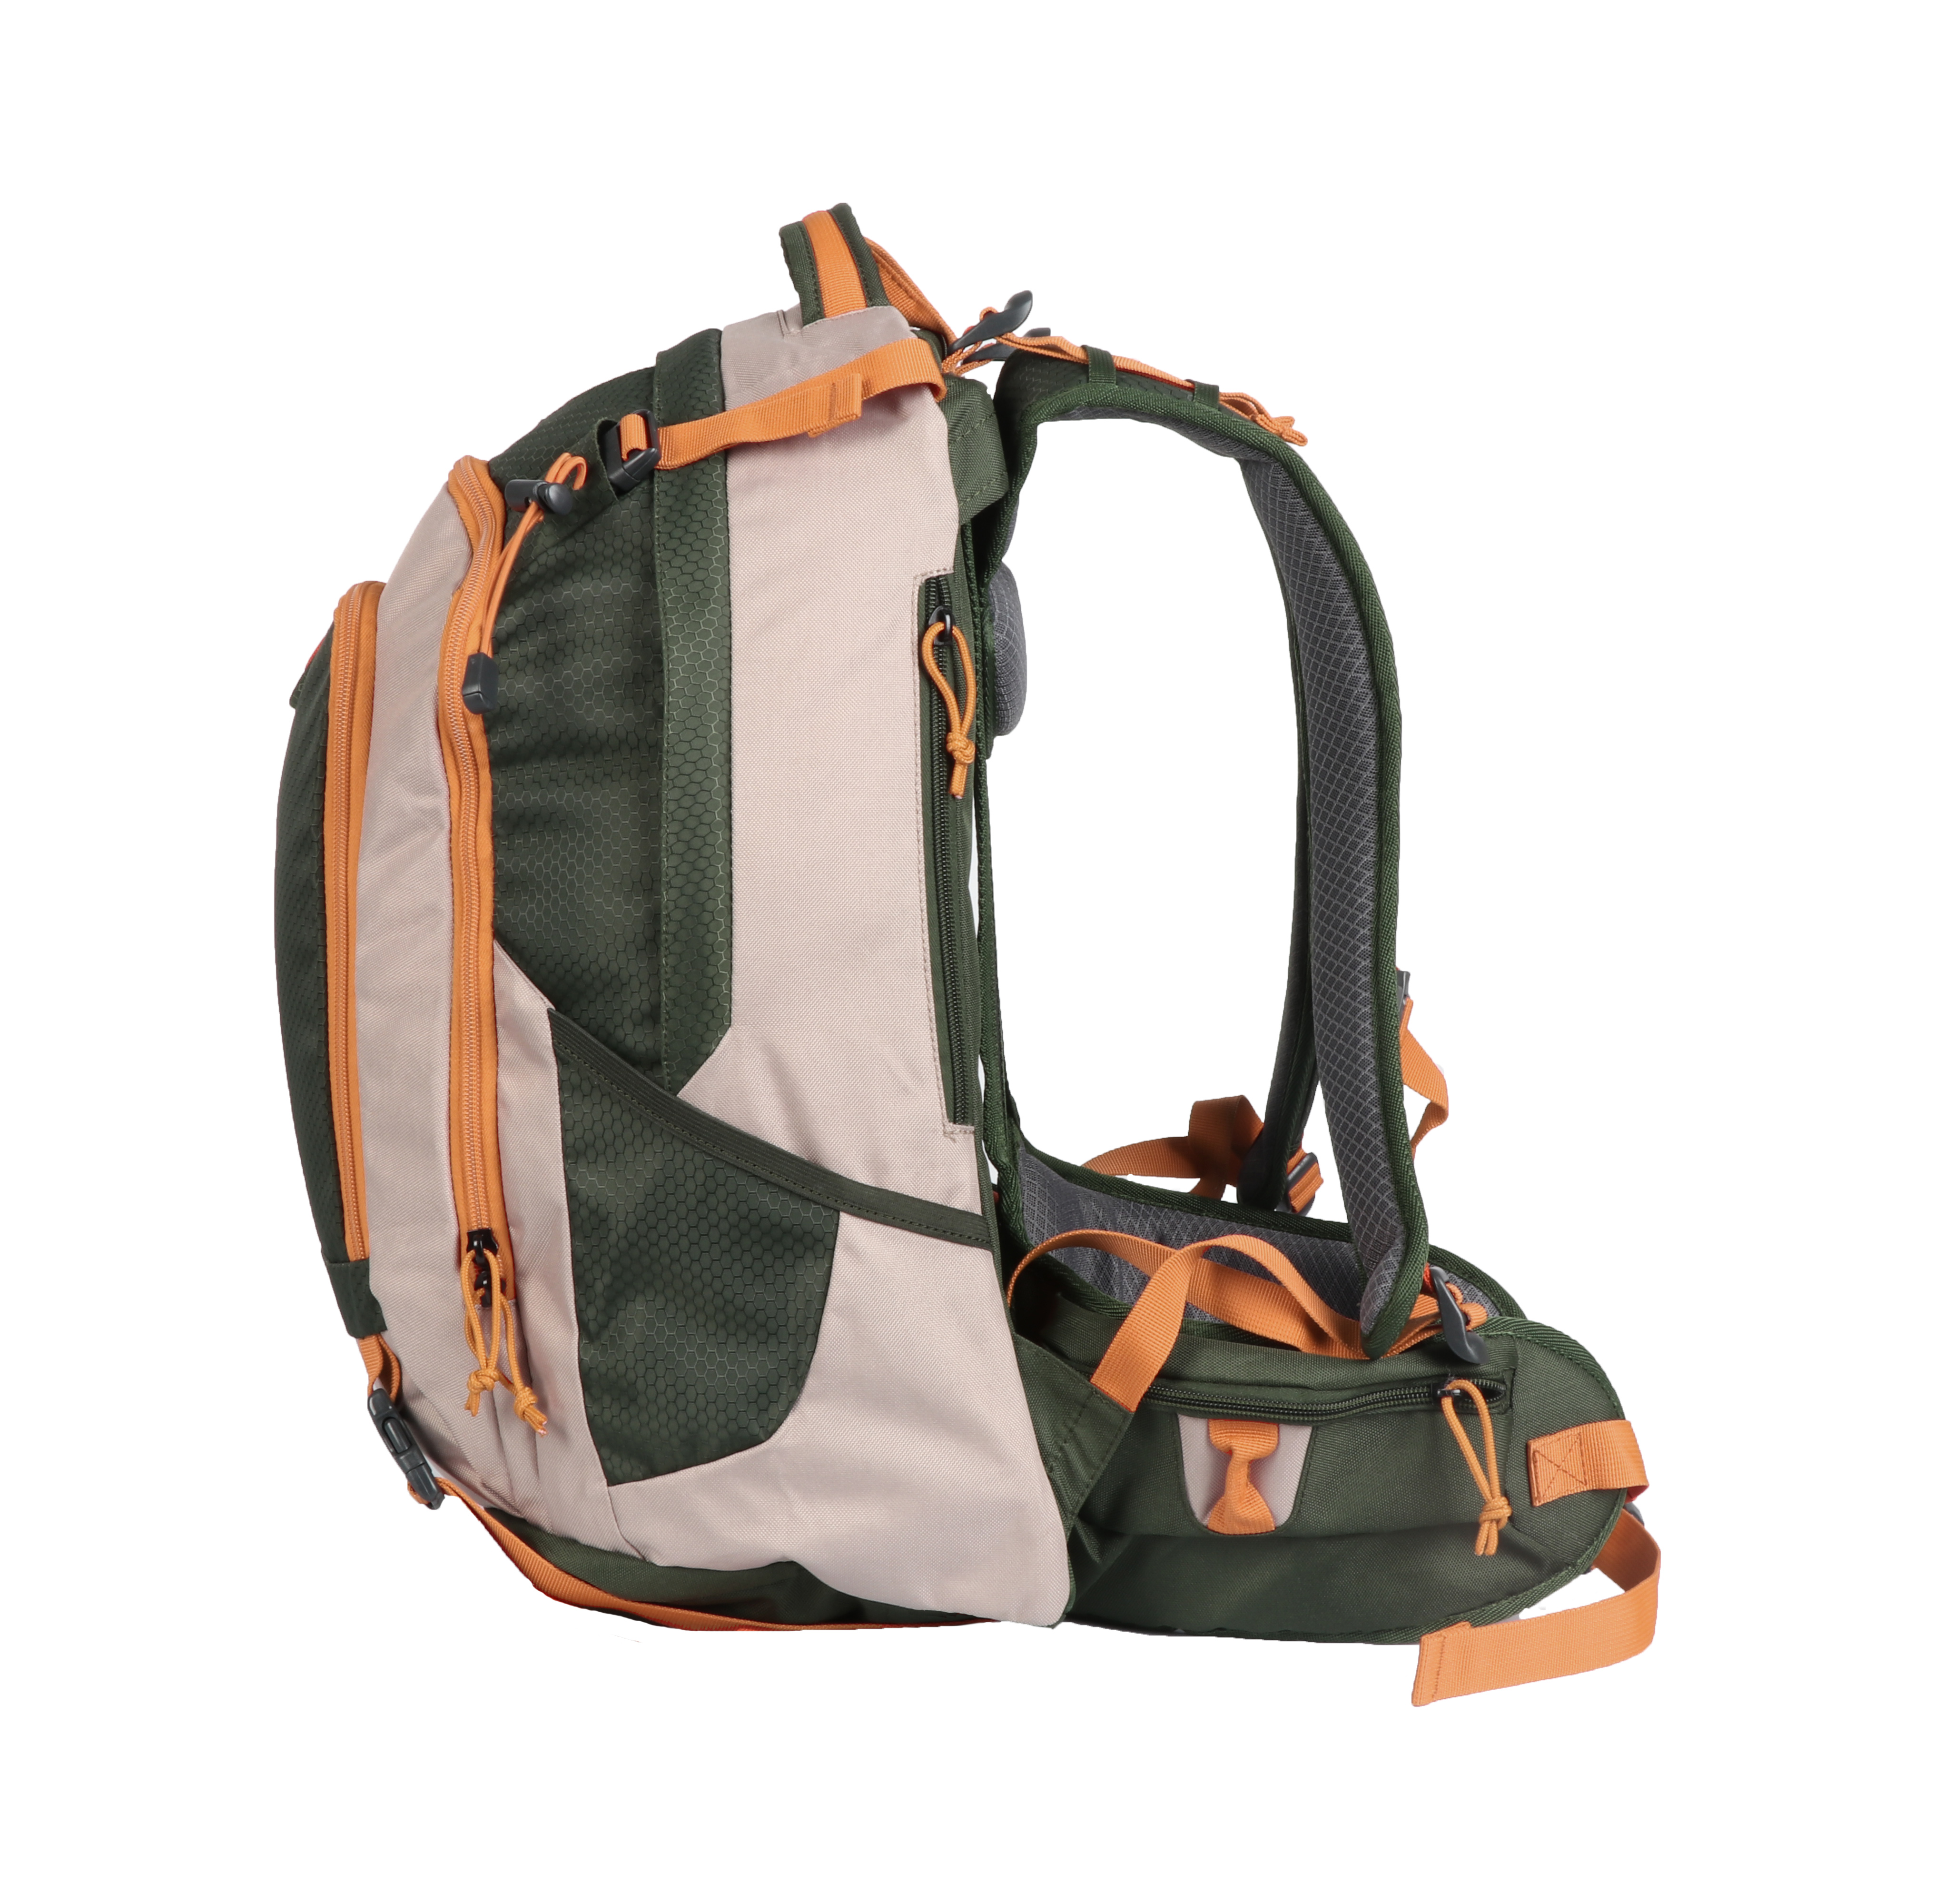 Ozark Trail 36 Liter Backpacking and Hiking Backpack, Adult, Unisex, Green Ripstop - image 2 of 16